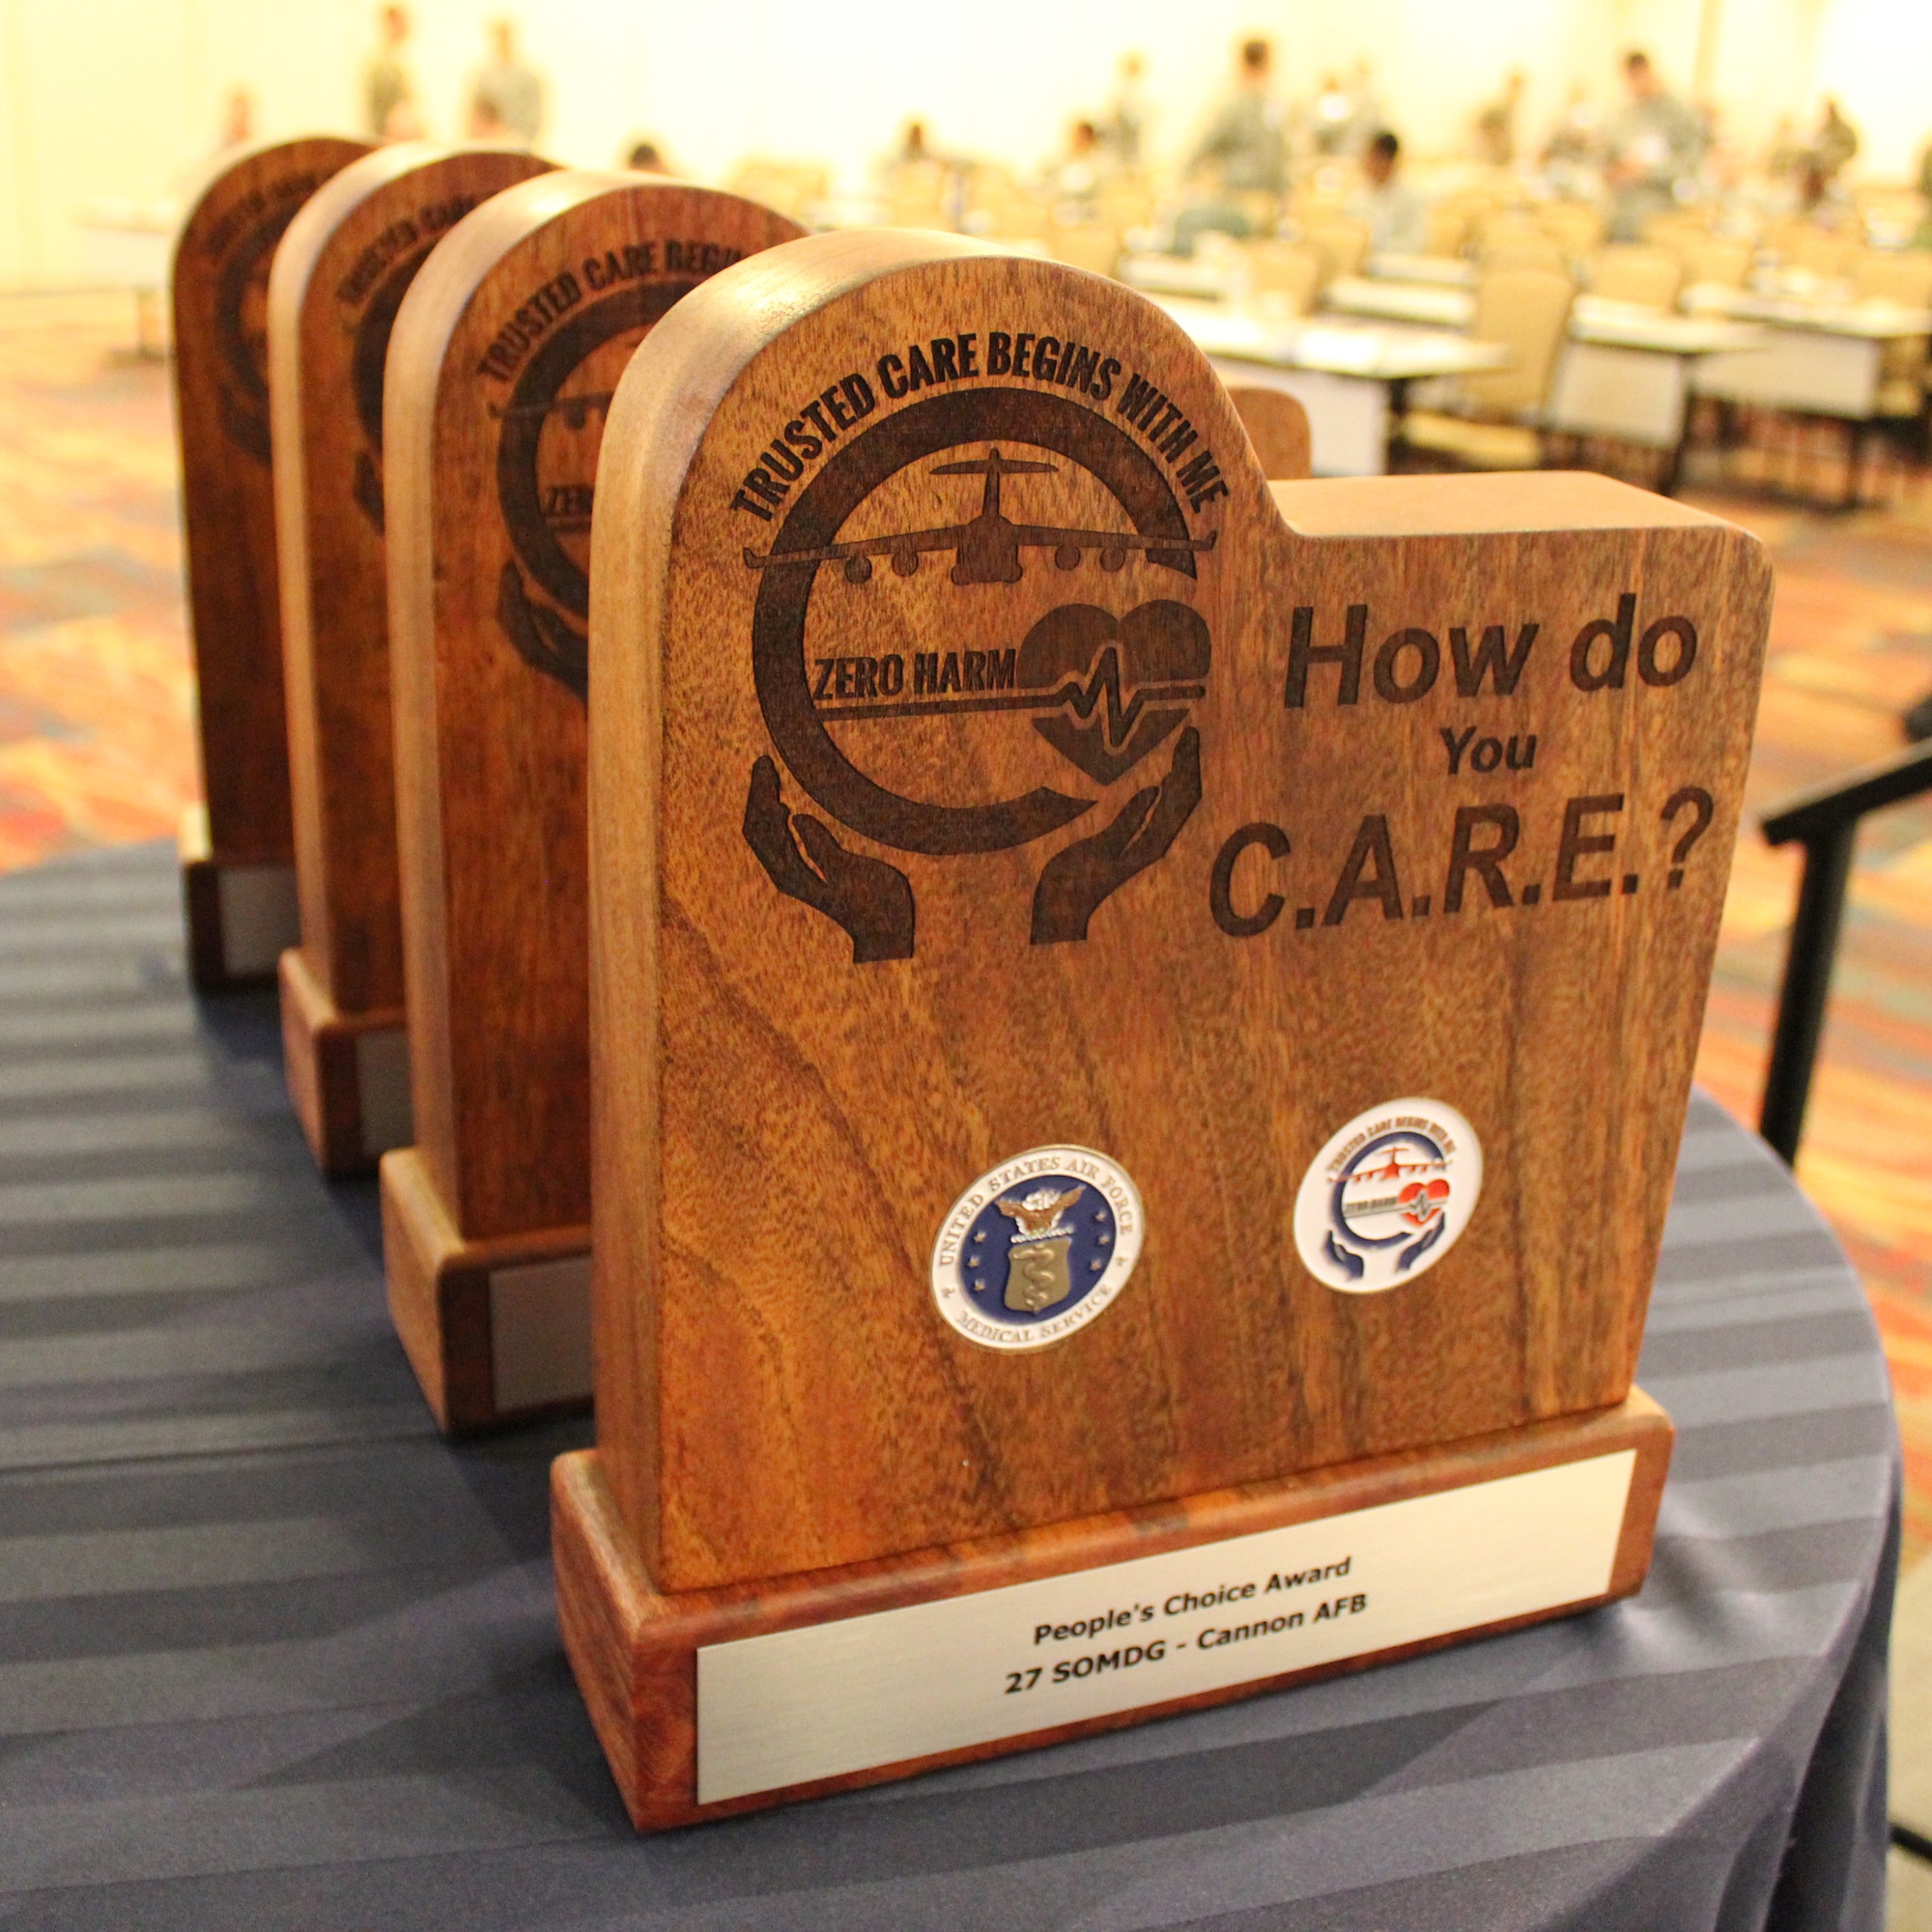 U.S Air Force Airmen from Cannon Air Force Base, New Mexico, Fairchild Air Force Base, Washington, Offutt Air Force Base, Nebraska, and Al Dhafra Air Base, United Arab Emirates, received awards as part of the Trusted Care “How Do You C.A.R.E.” campaign, during the 2018 Air Force Medical Service Senior Leadership Workshop at the National Conference Center in Leesburg, Va., Dec. 5, 2018. (U.S. Air Force photo by Josh Mahler)